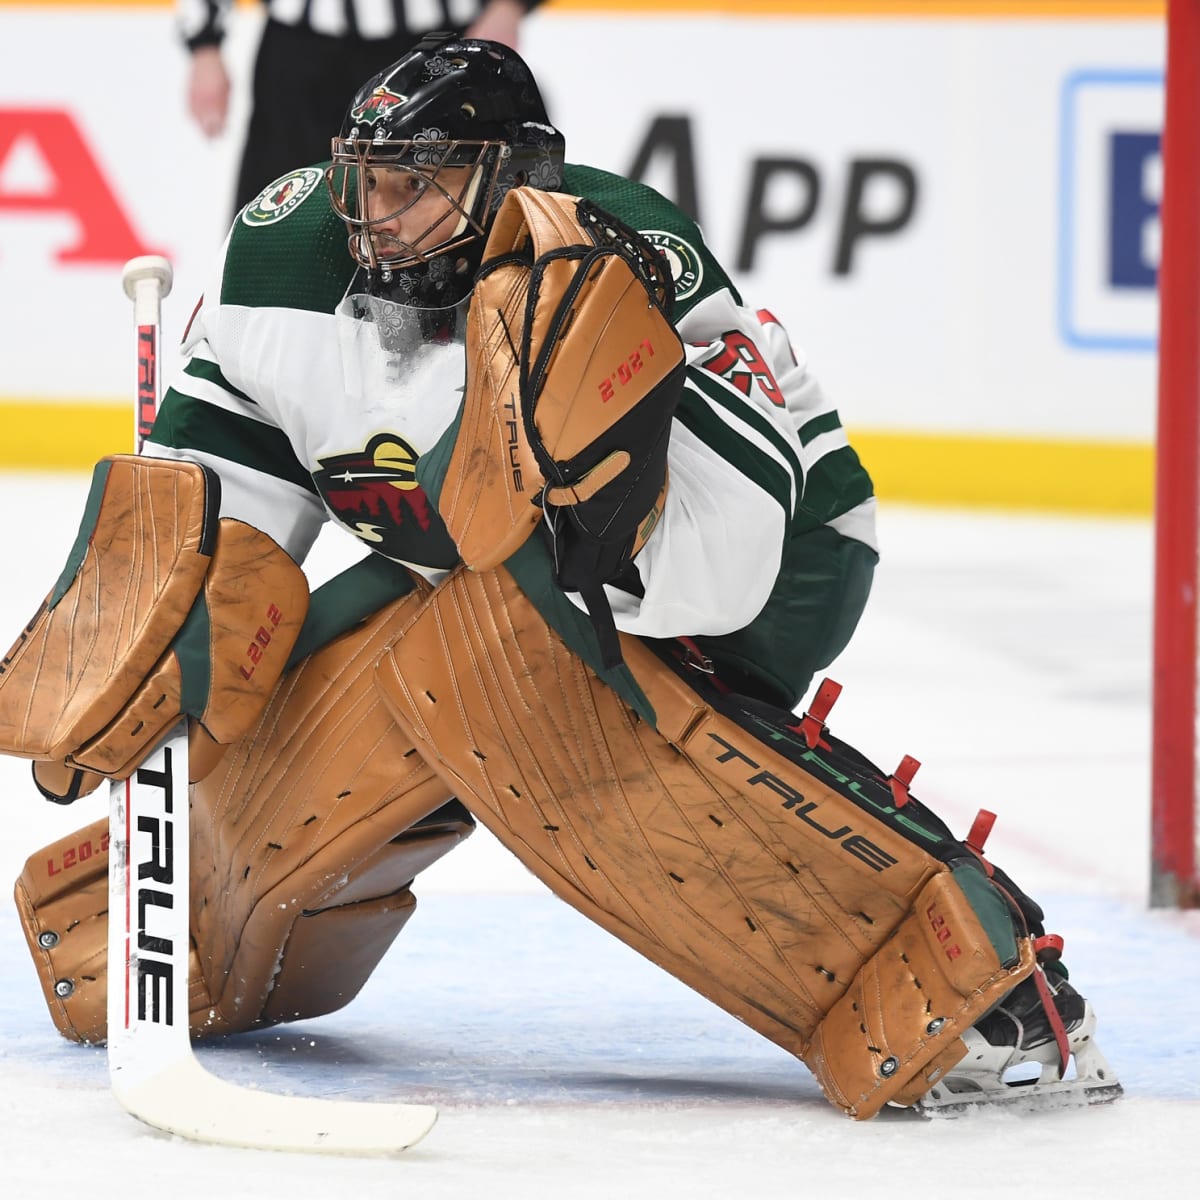 Minnesota Wild acquire Marc-Andre Fleury from the Blackhawks